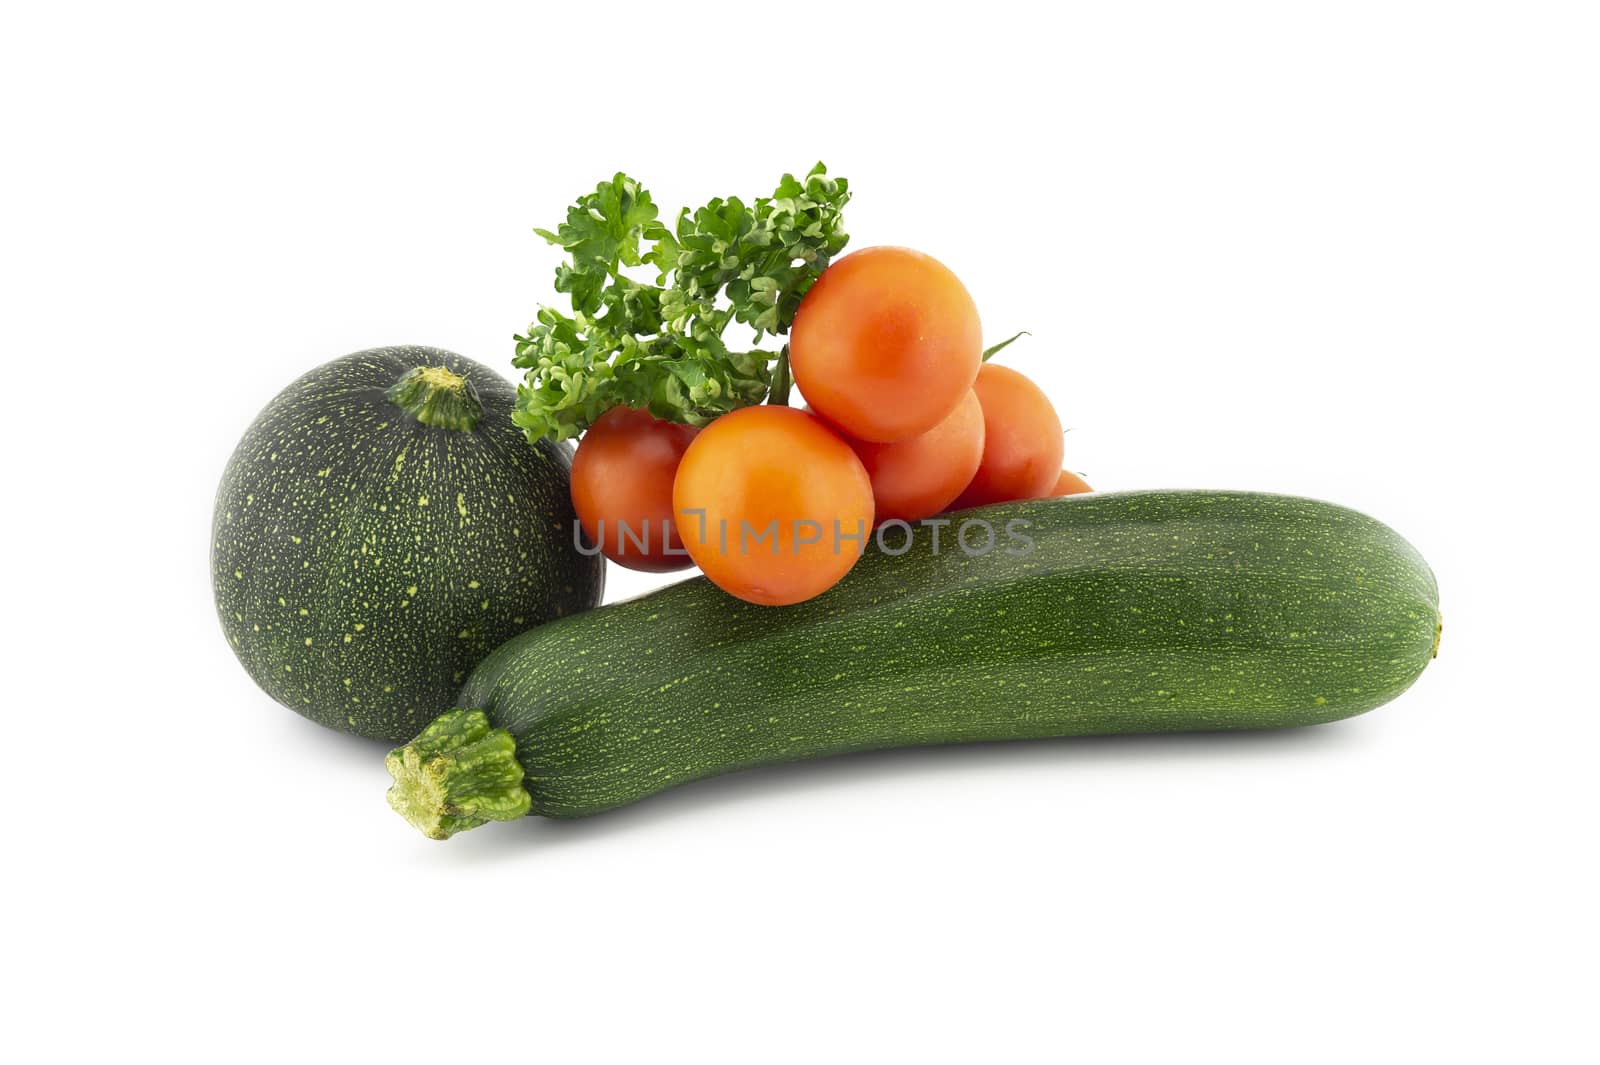 Green round and traditional courgette or zucchini, cherry tomato twig and fresh parsley sprigs isolated on white background